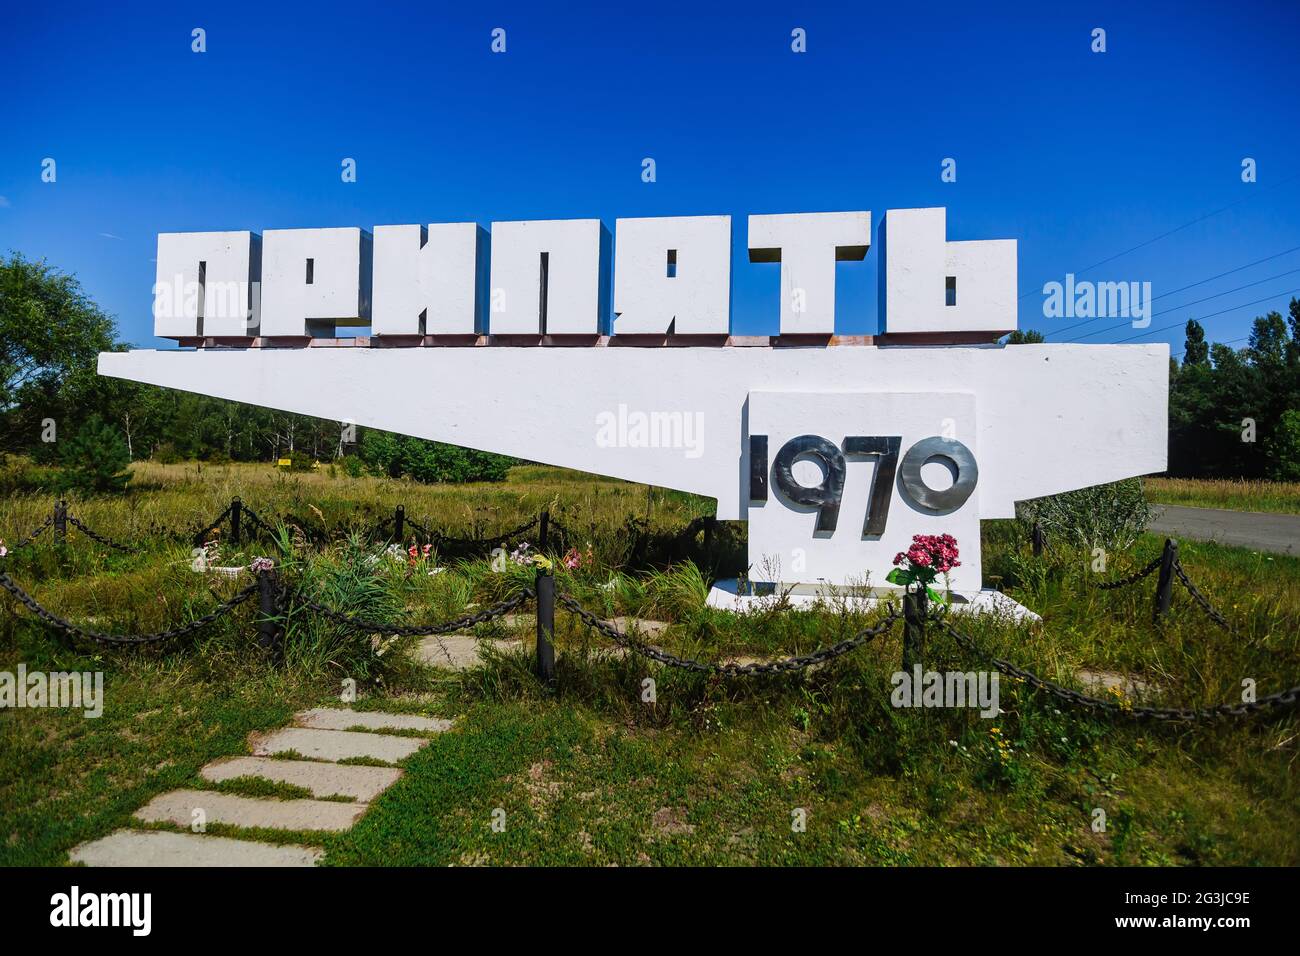 Pripyat city, Chernobyl's Exclusion Zone Ukraine. Stella with city name in ghost town Pripyat Chornobyl Zone, radiation, nuclear catastrofe Stock Photo